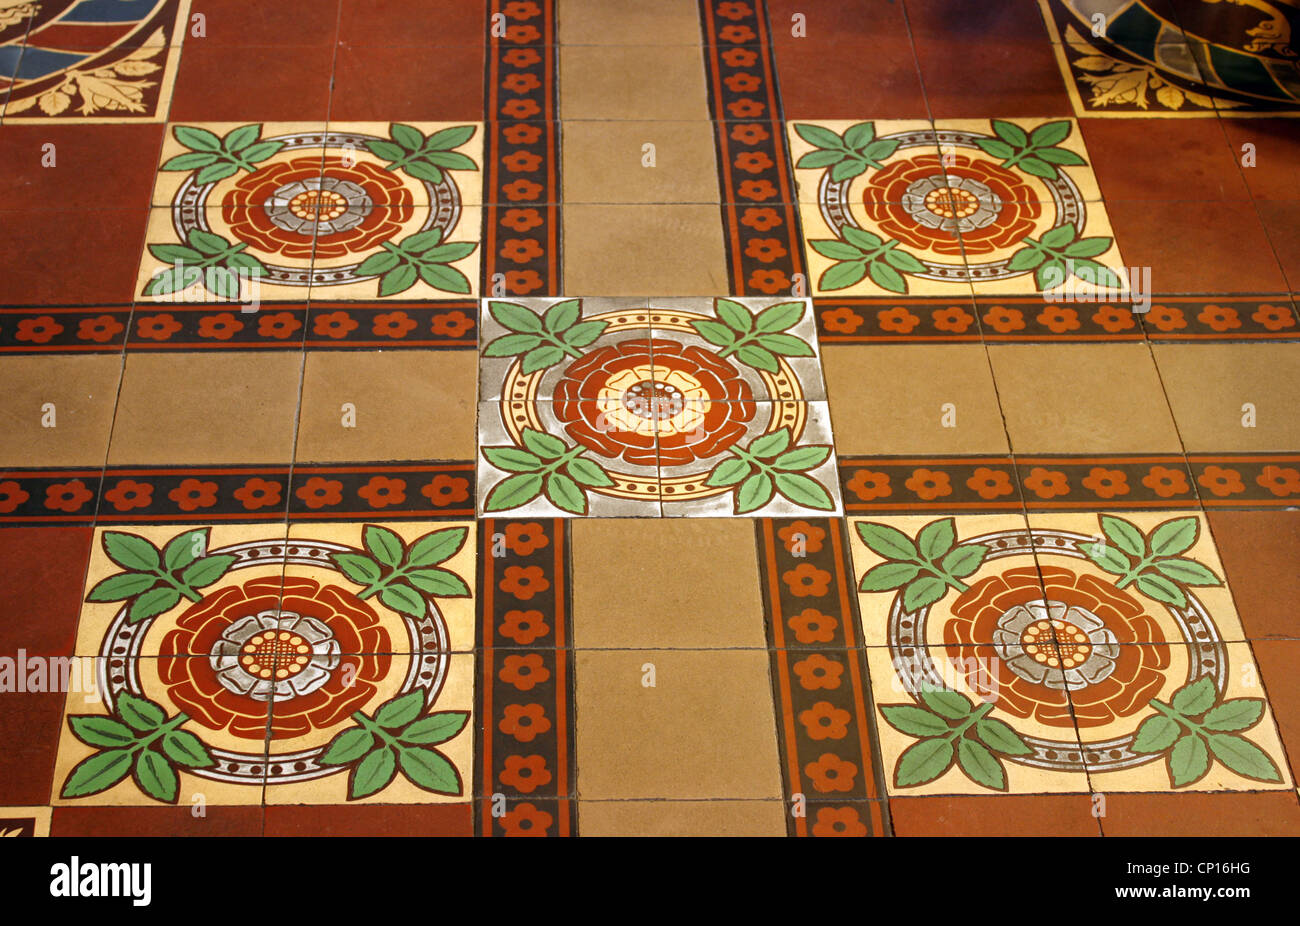 Minton floor tiles at Rochdale Town Hall, Rochdale, Greater Manchester, UK. Stock Photo